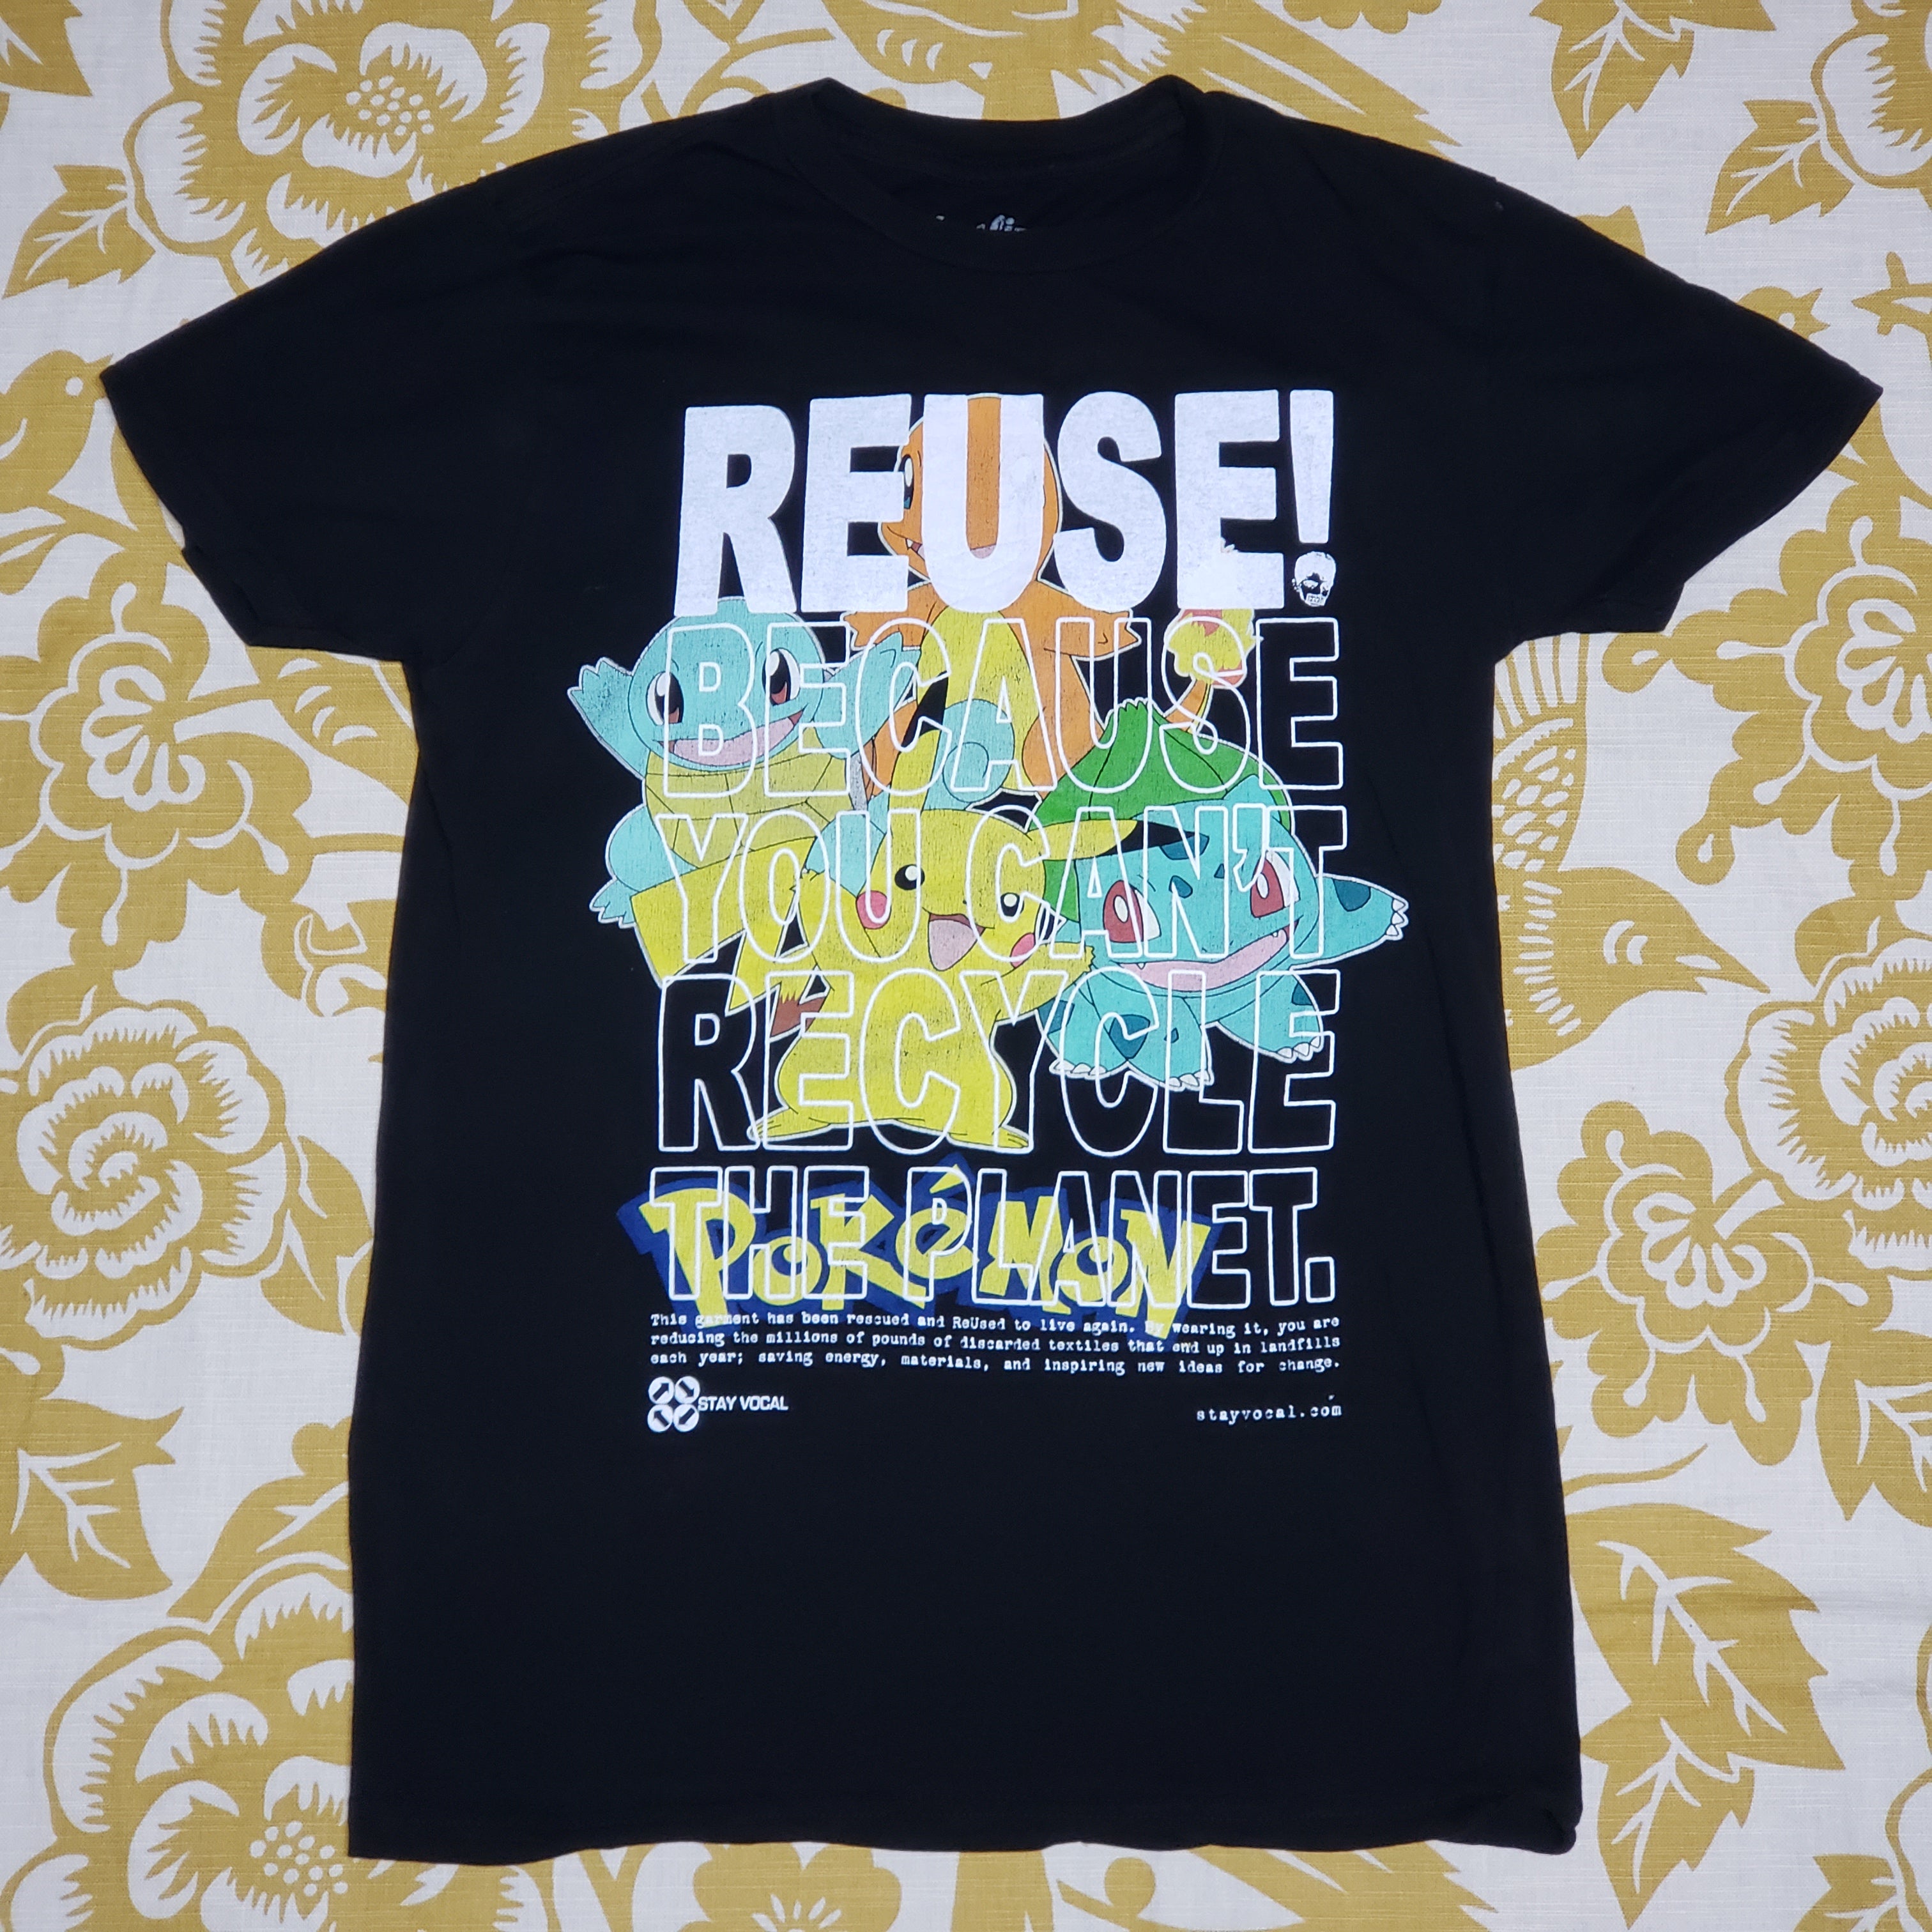 One of a Kind (Men's S) REUSE! Pokémon Cheering T-Shirt